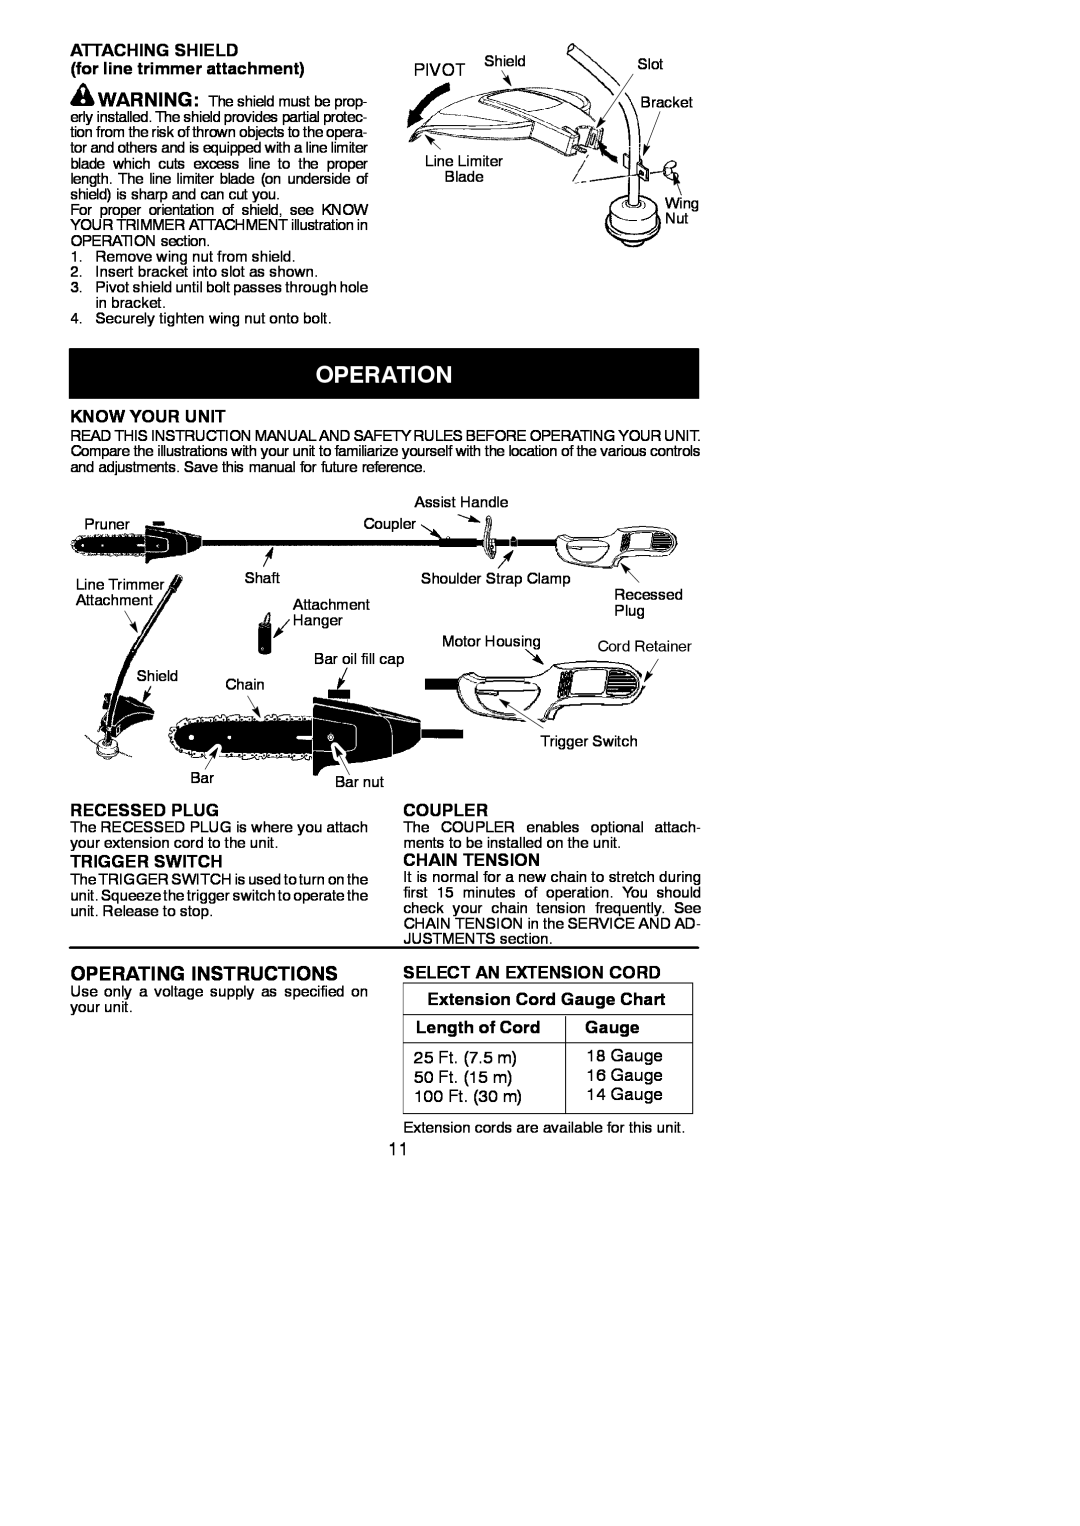 Poulan 545117551 Operation, Operating Instructions, ATTACHING SHIELD for line trimmer attachment, PIVOT Shield, Coupler 